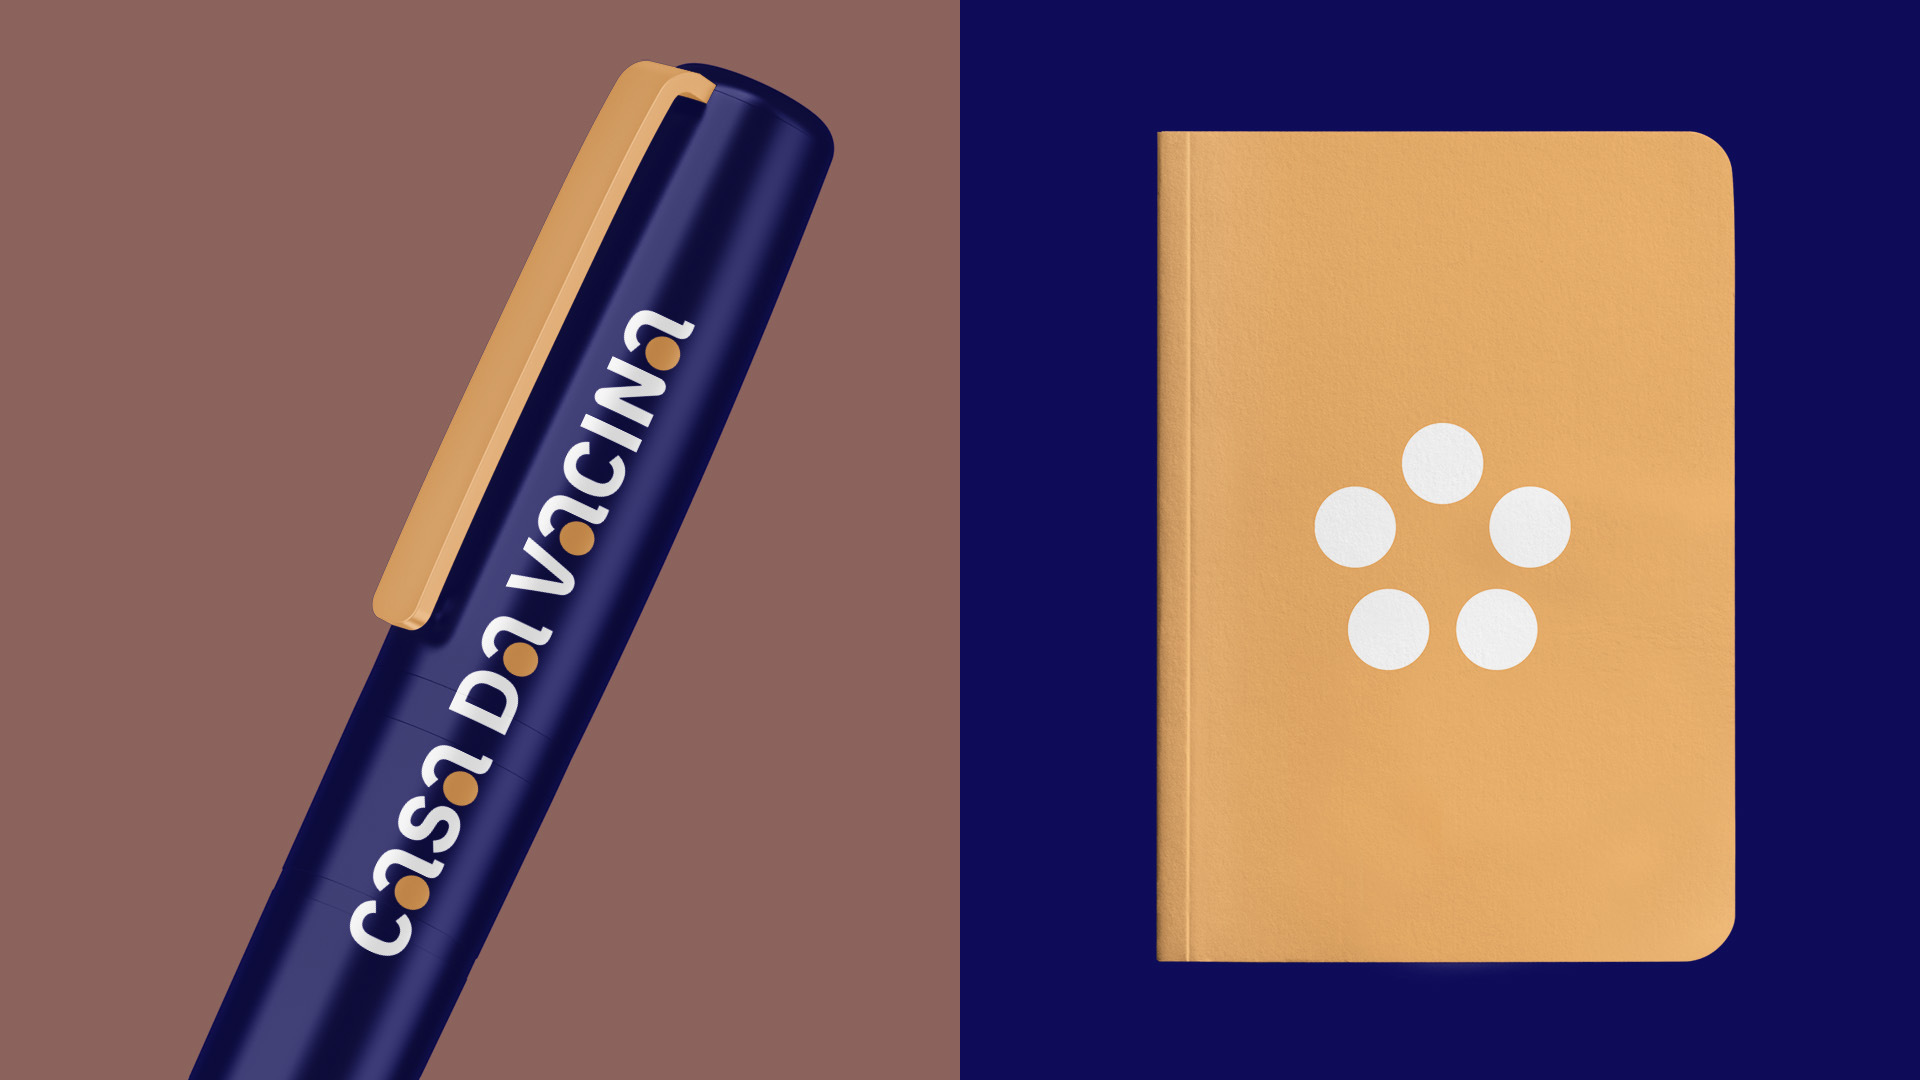 Exclusive Mockups for Branding and Packaging Design